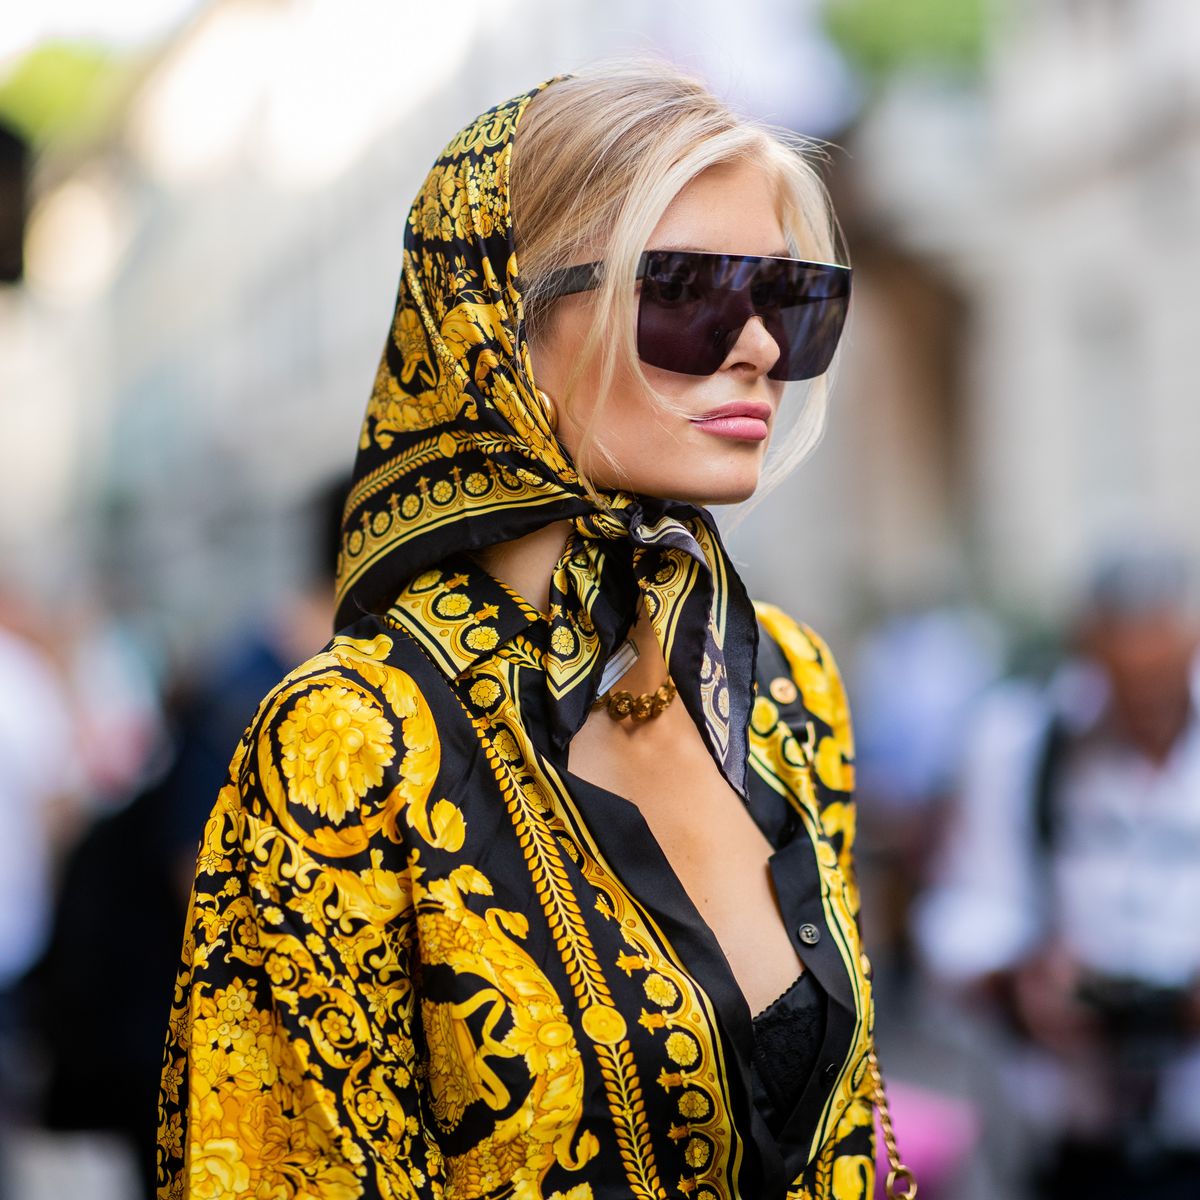 How To Wear A Headscarf, According To Your Instagram Faves